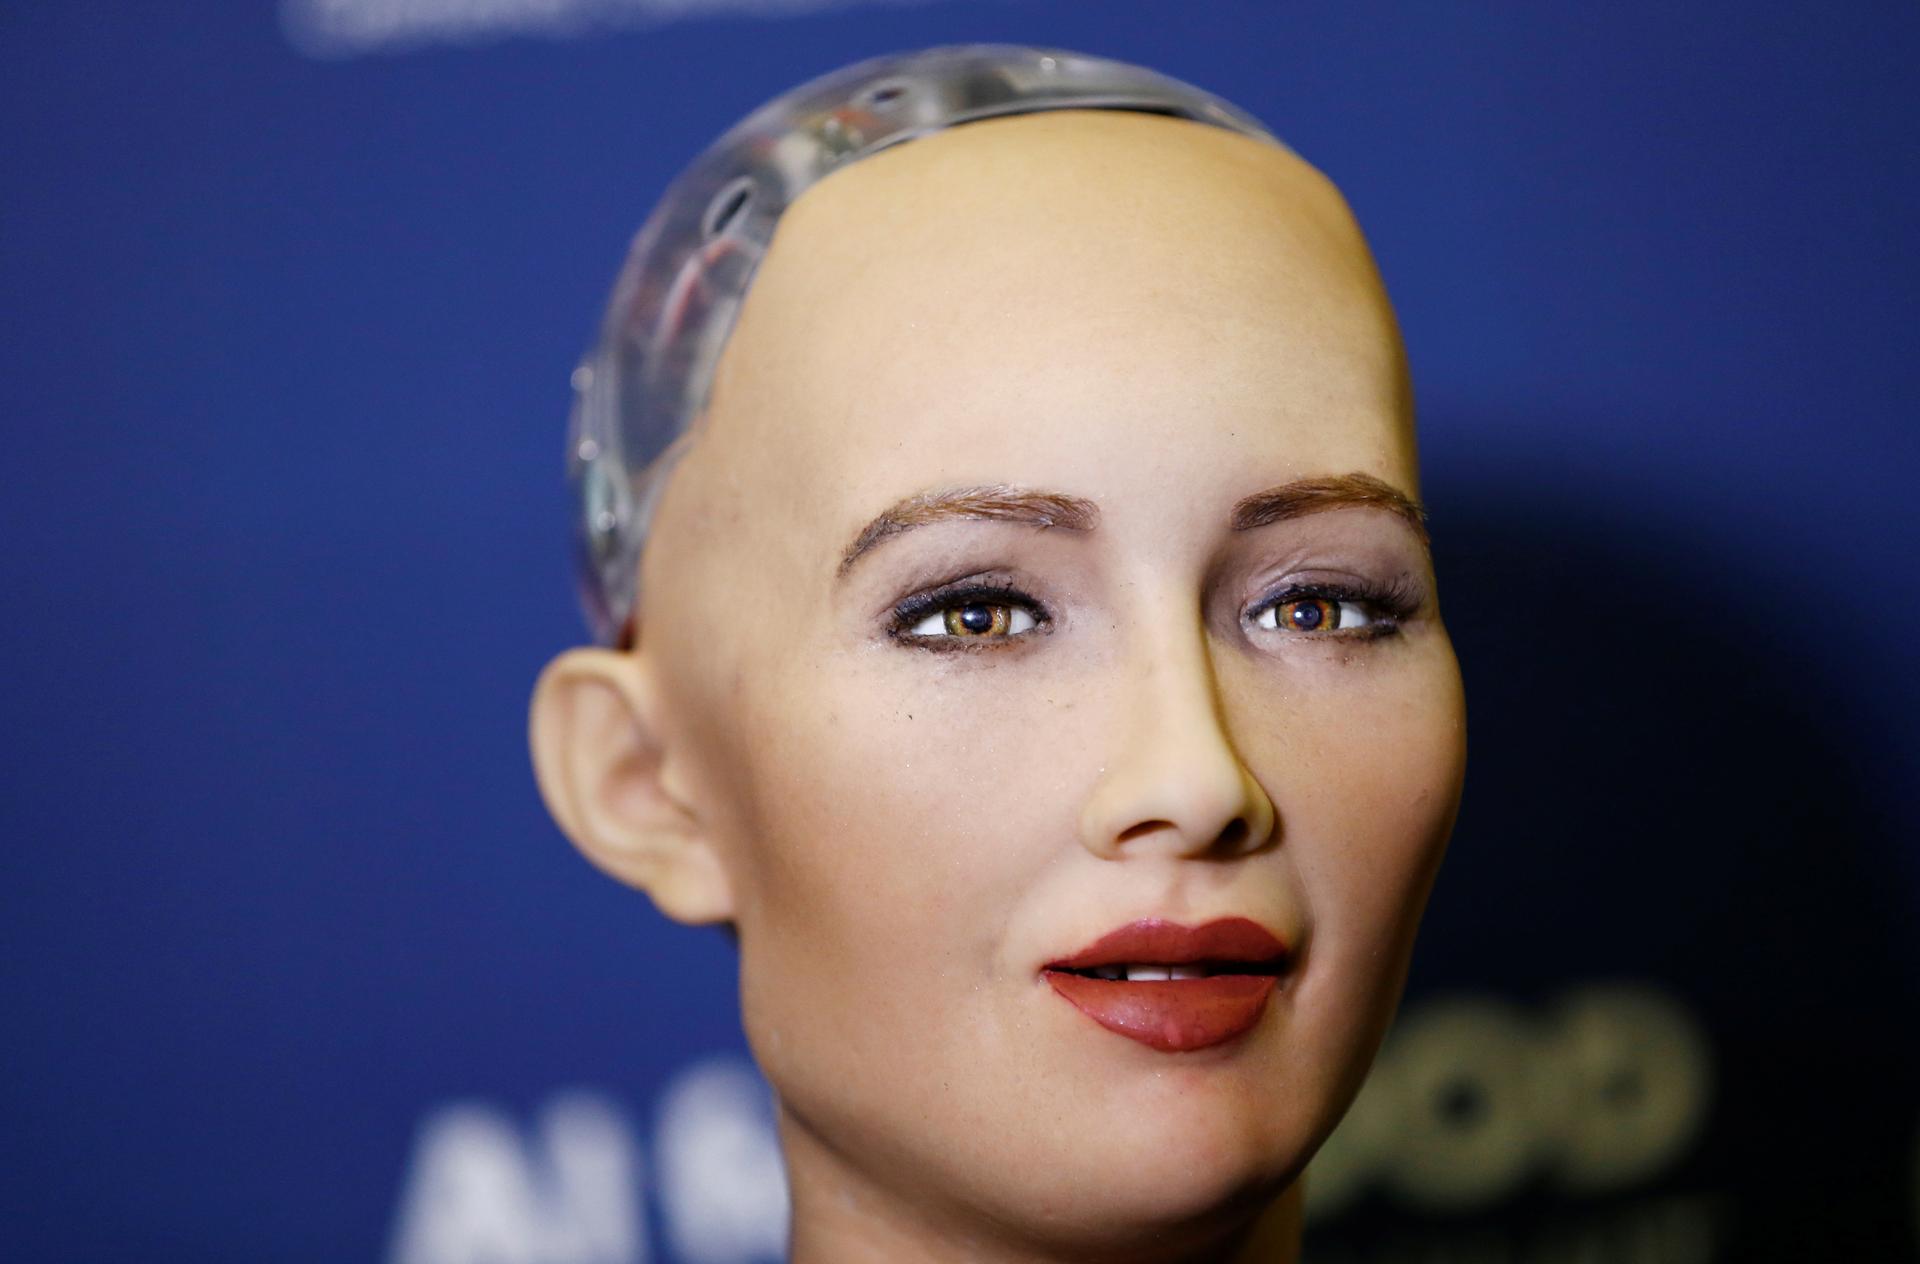 Sophia, a robot integrating the latest technologies and artificial intelligence developed by Hanson Robotics is pictured during a presentation at the "AI for Good" Global Summit at the International Telecommunication Union (ITU) in Geneva, Switzerland Jun